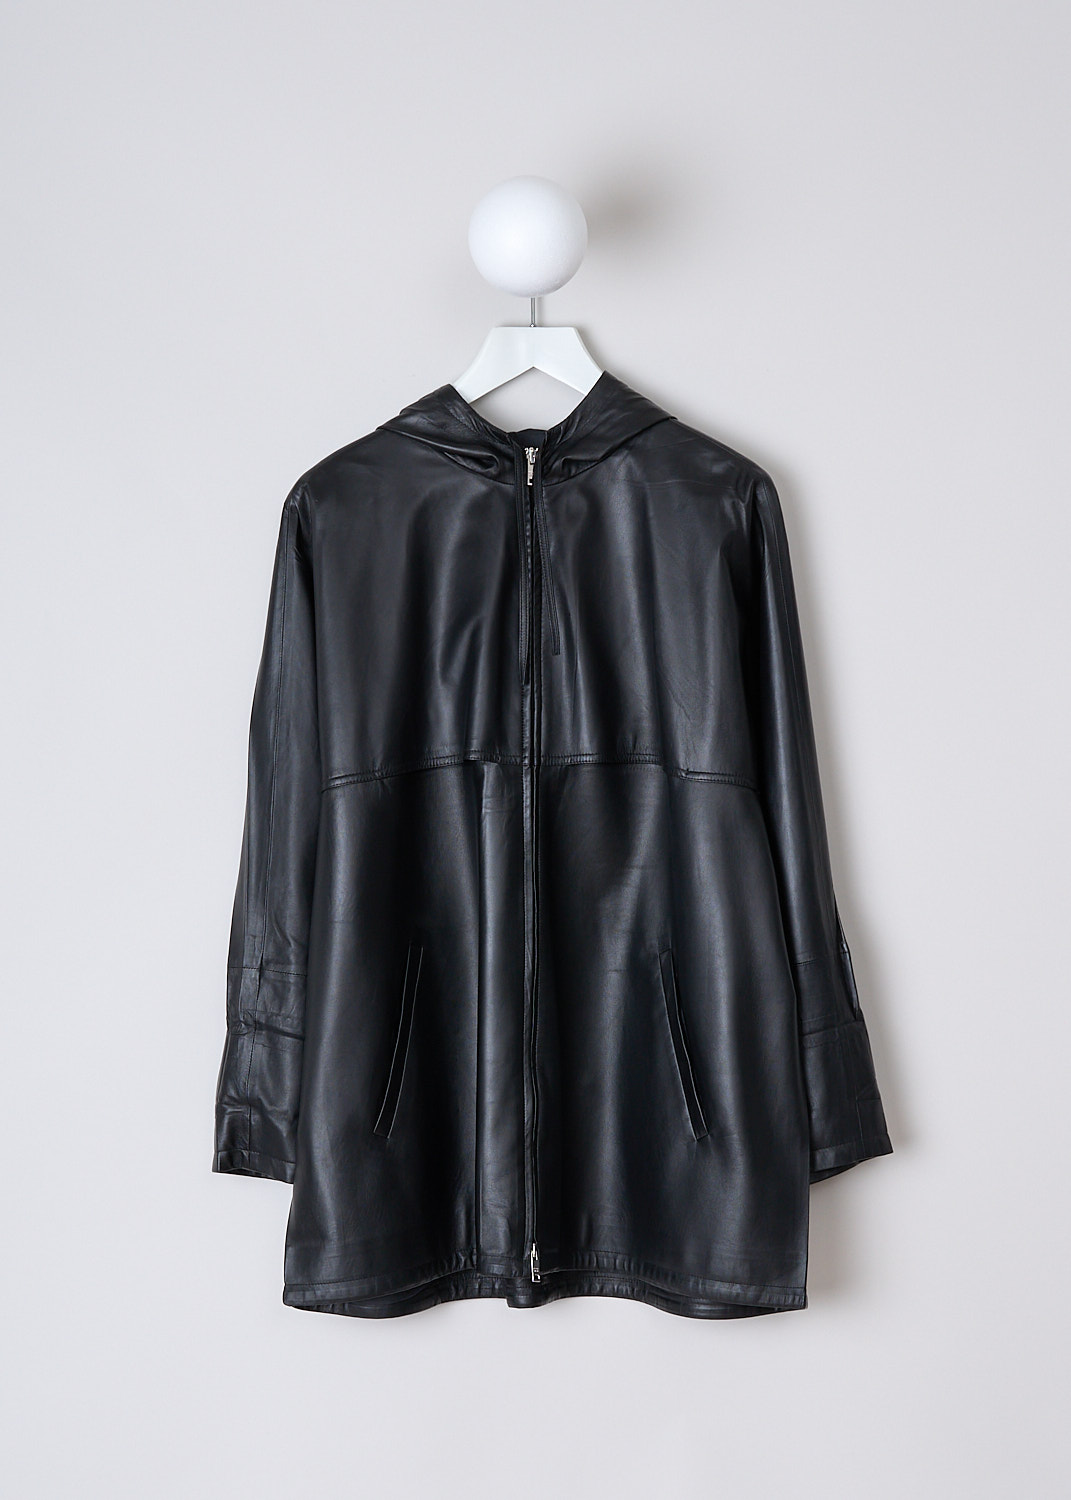 PRADA, BLACK HOODED LEATHER JACKET, 58853_JHI_F0002_NAPPA_NERO, Black, Front, This black leather jacket has a hood with drawstrings. The jacket has a silver-tone two-way zipper in the front. Slanted welt pockets can be found in the front. The jacket has a stormflap in the front and back. The straight hemline has drawstring. The jacket has a wider silhouette. 
